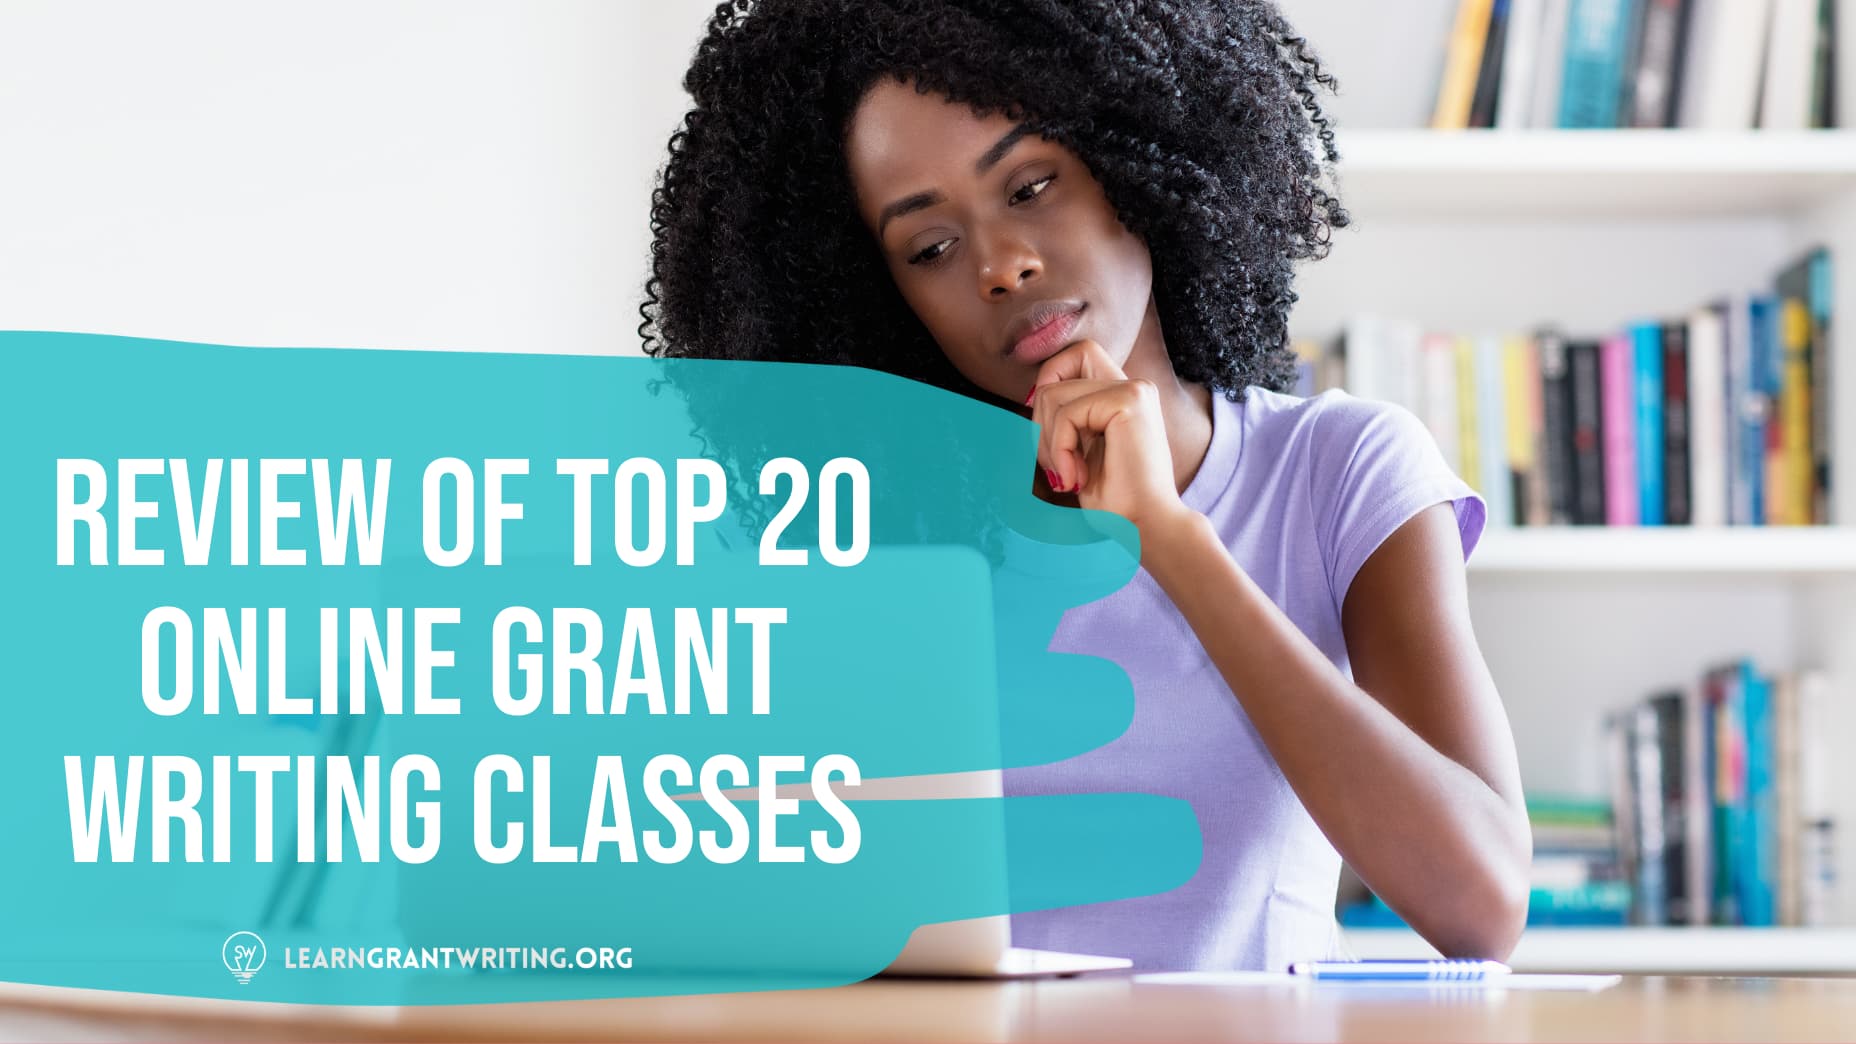 Review of Top 20 Online Grant Writing Classes